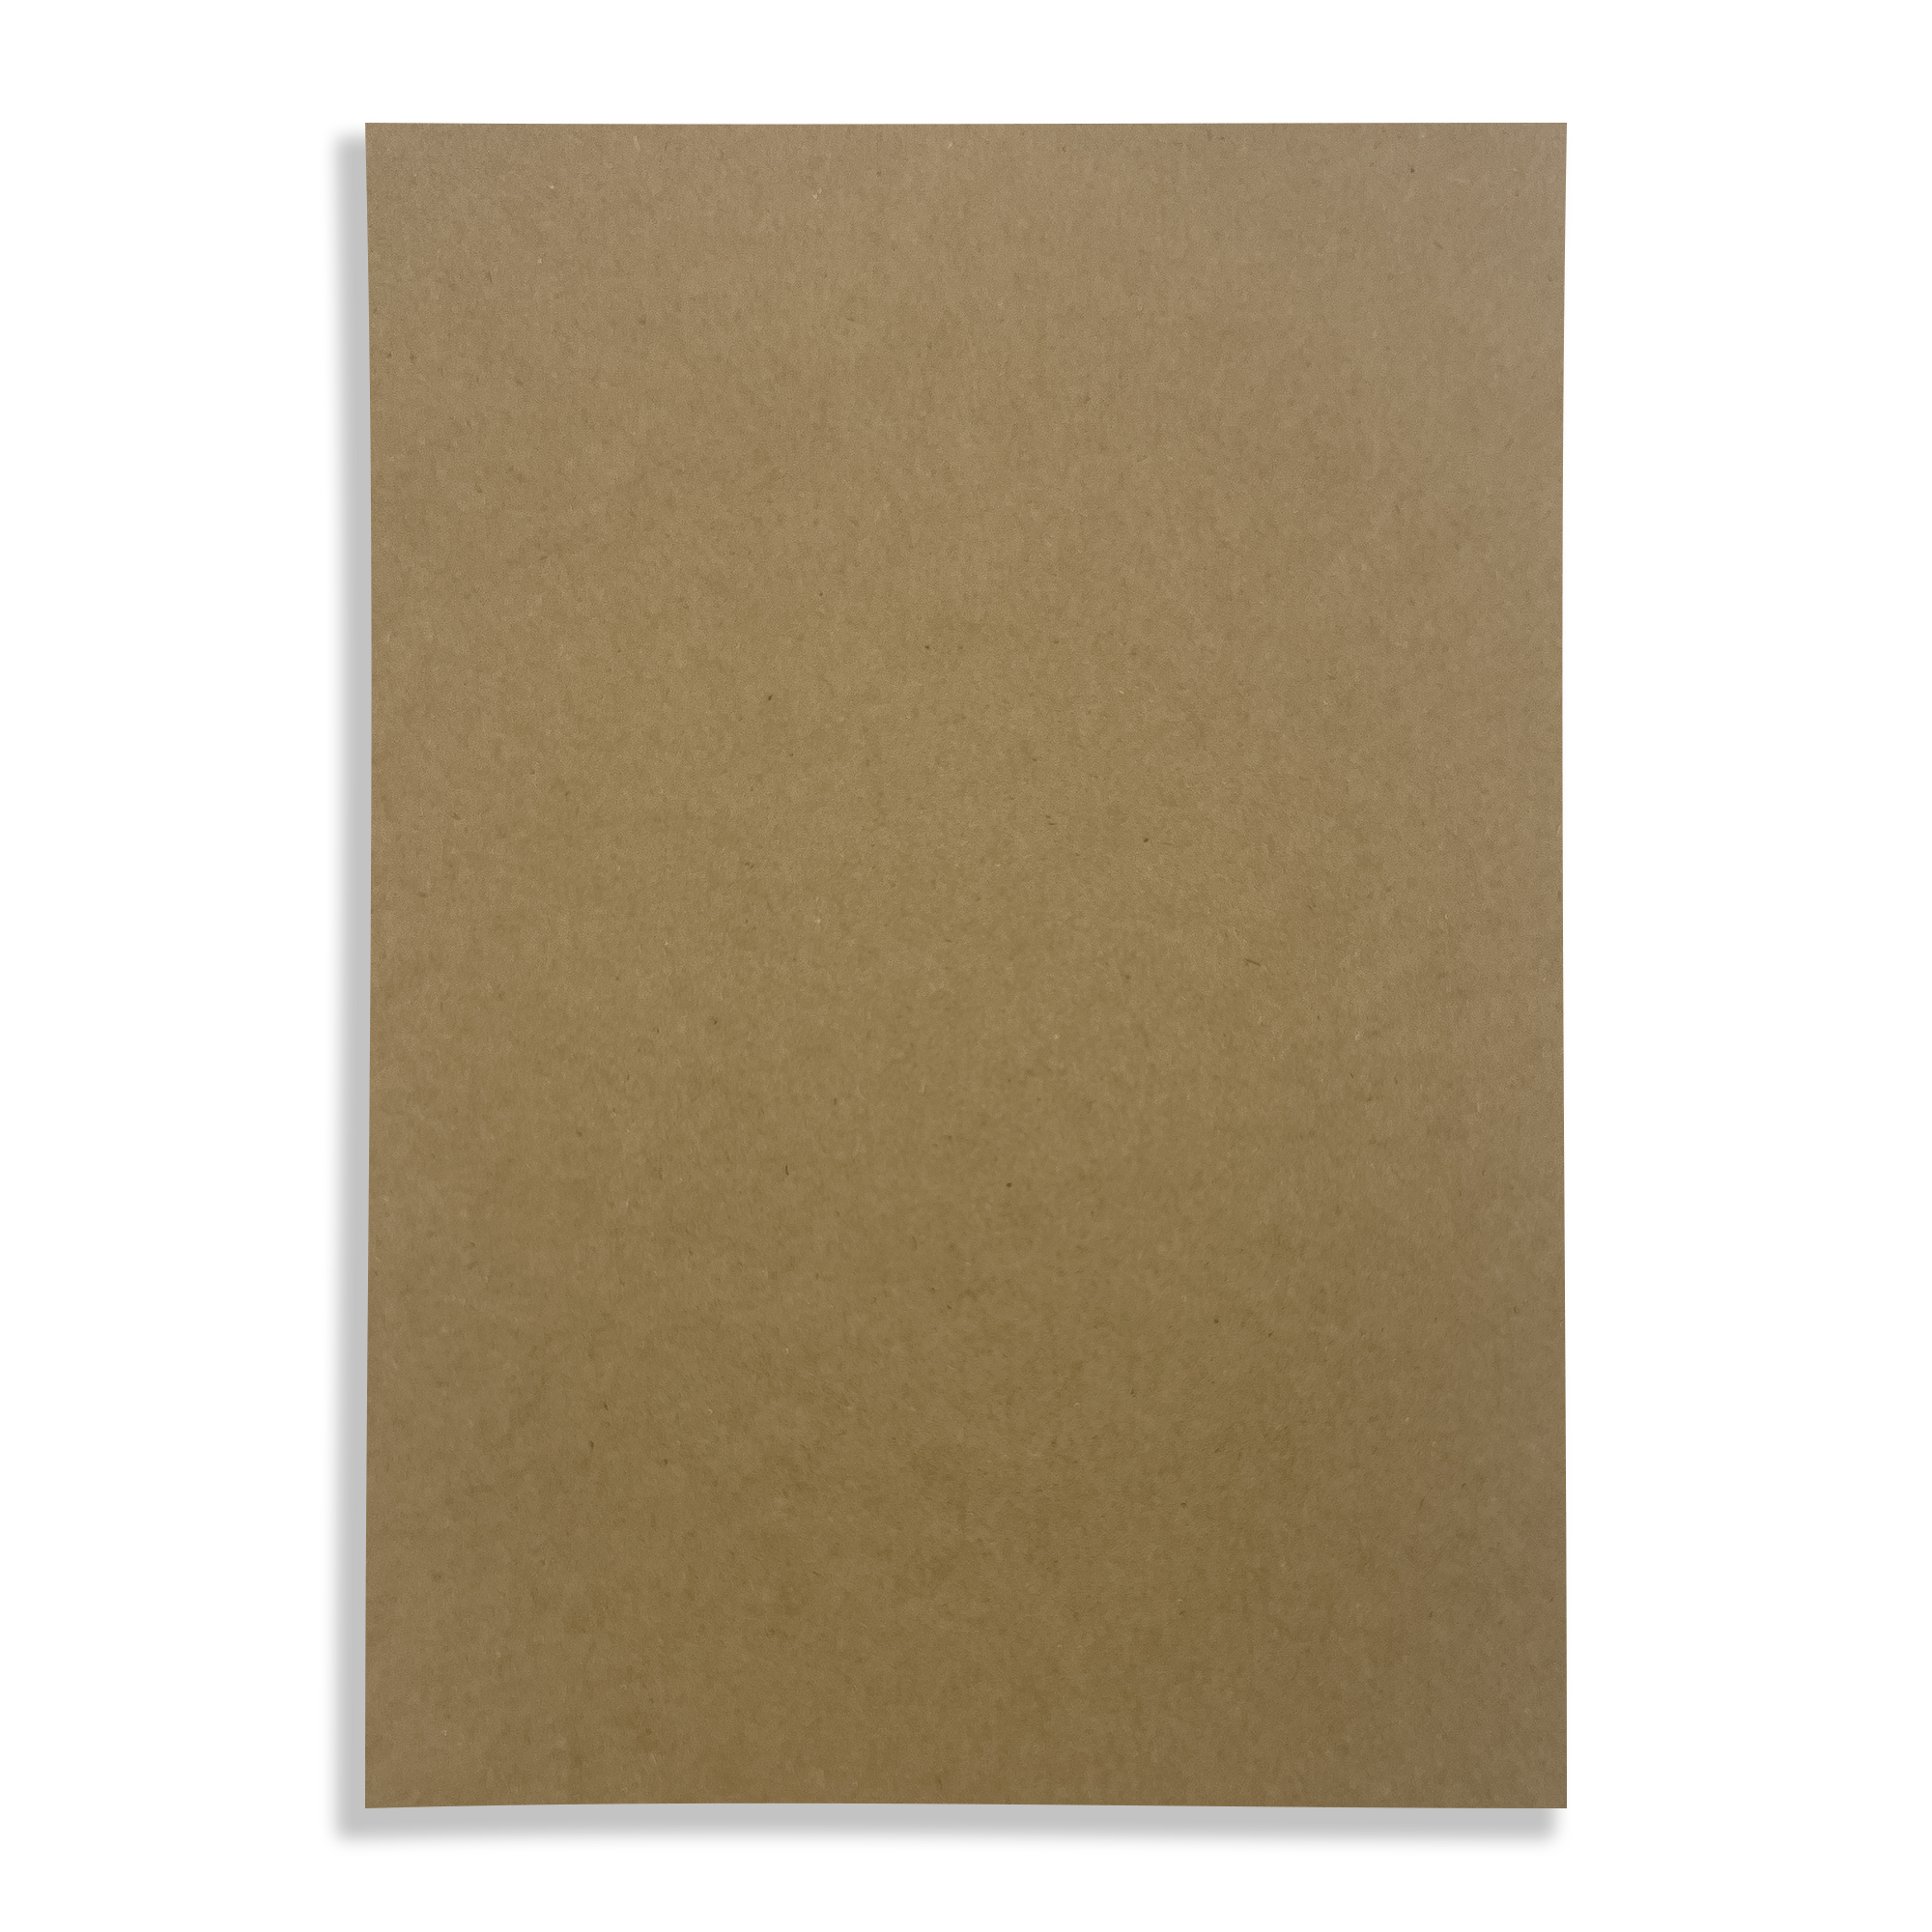 A4 Cairn Eco Kraft Recycled 280gsm Card